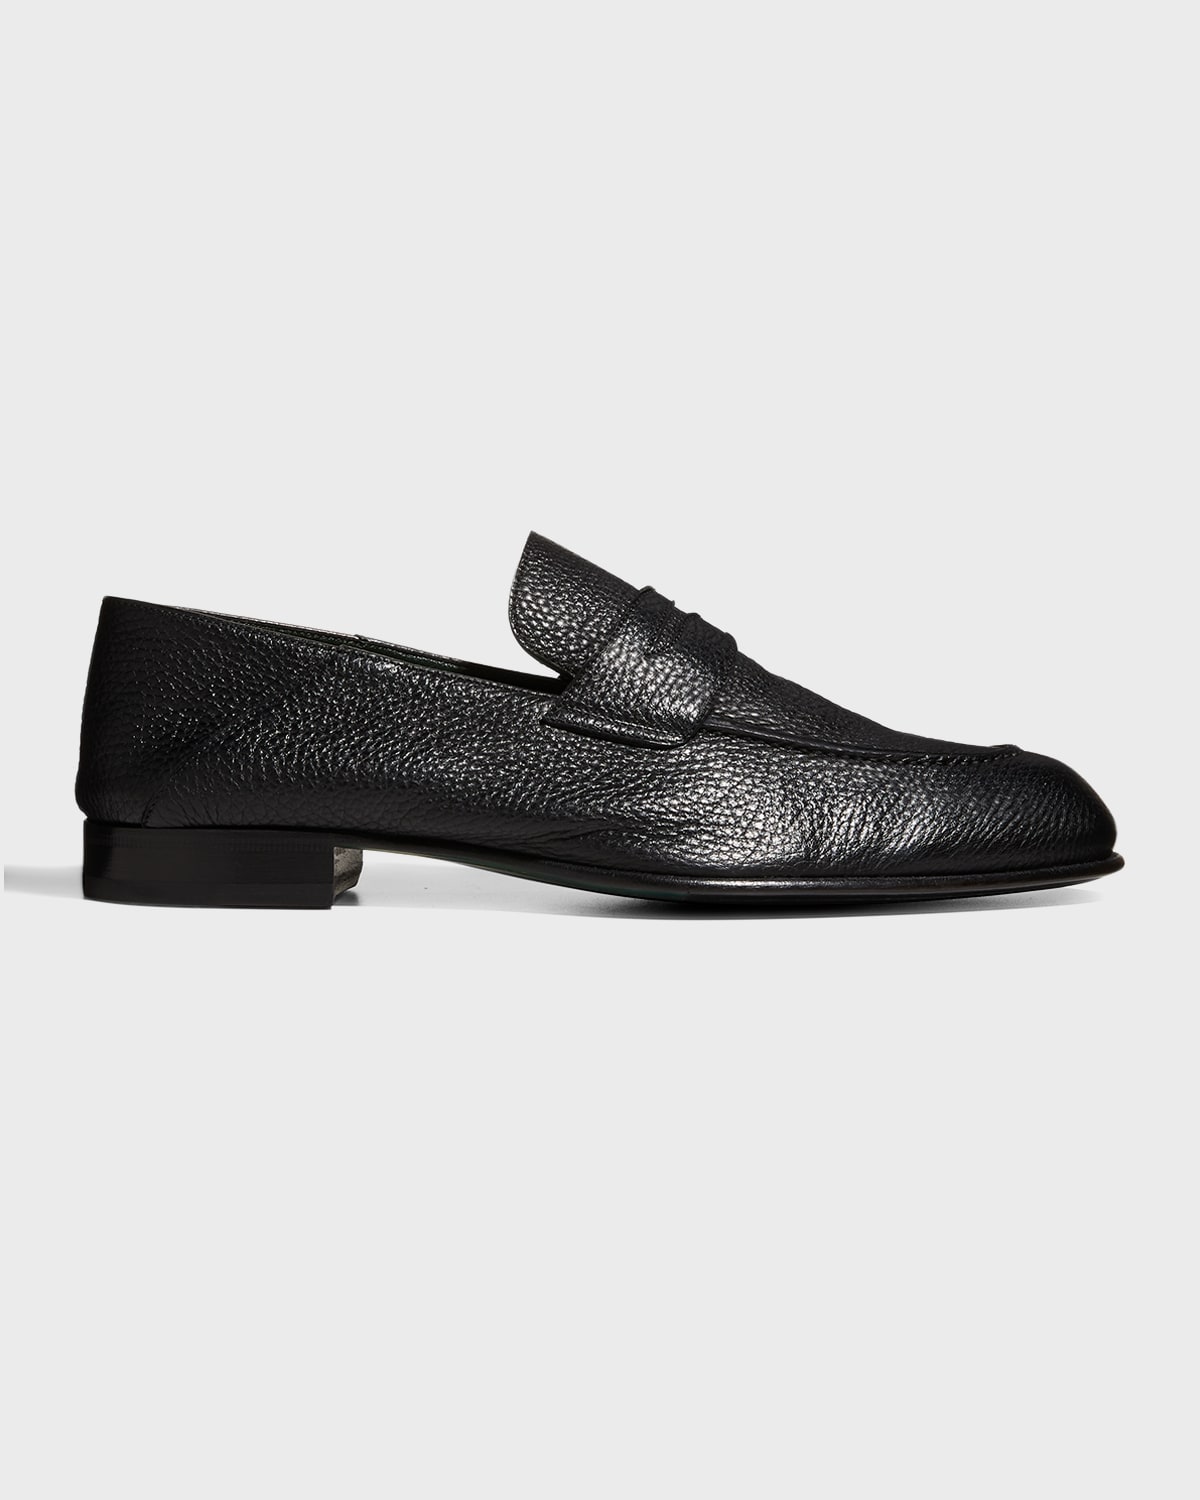 Brioni Men's Almond-toe Leather Penny Loafers In Black